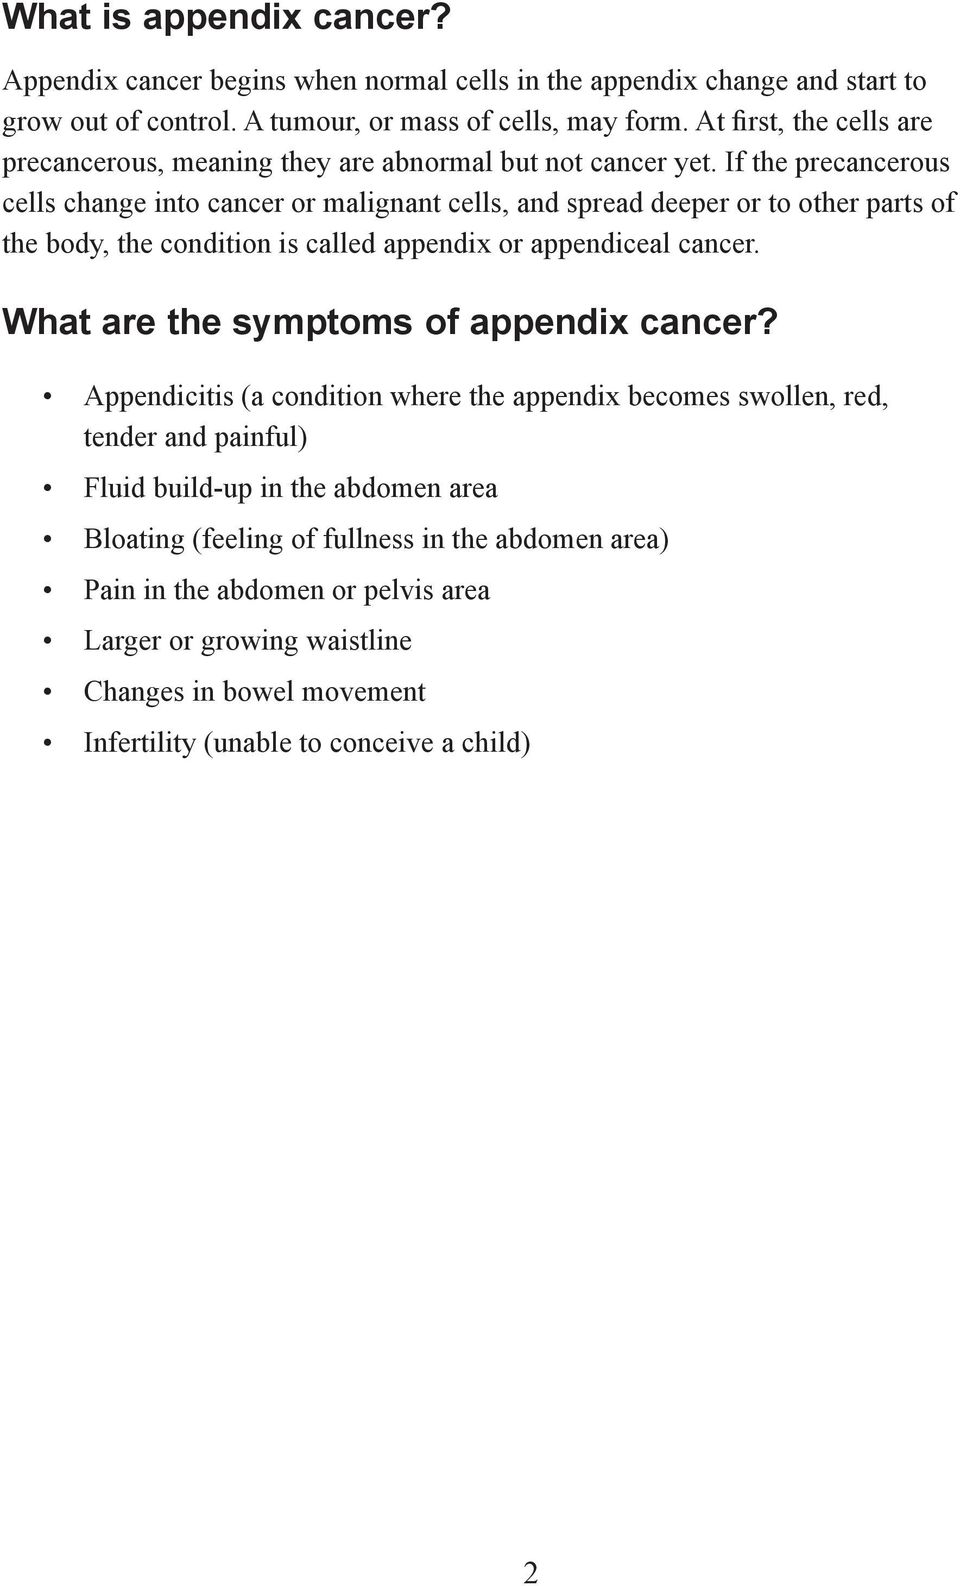 If the precancerous cells change into cancer or malignant cells, and spread deeper or to other parts of the body, the condition is called appendix or appendiceal cancer.